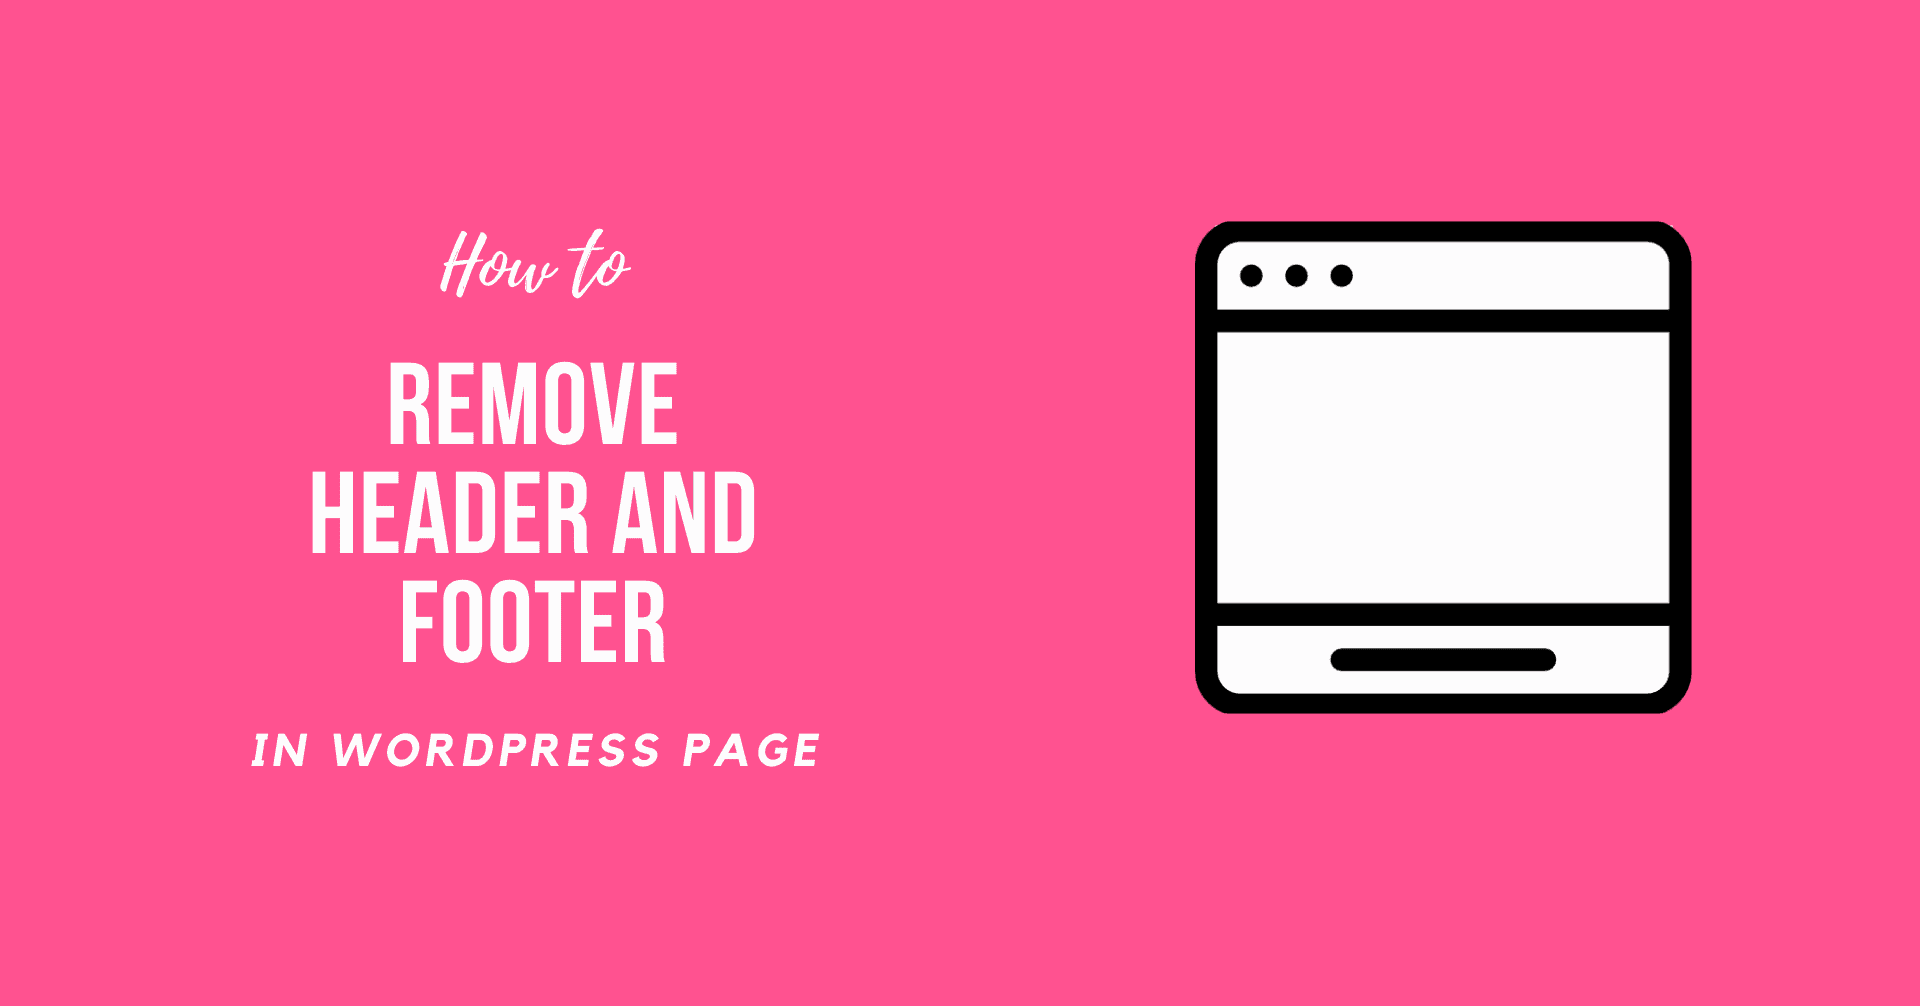 How to Remove Header and Footer in WordPress Page